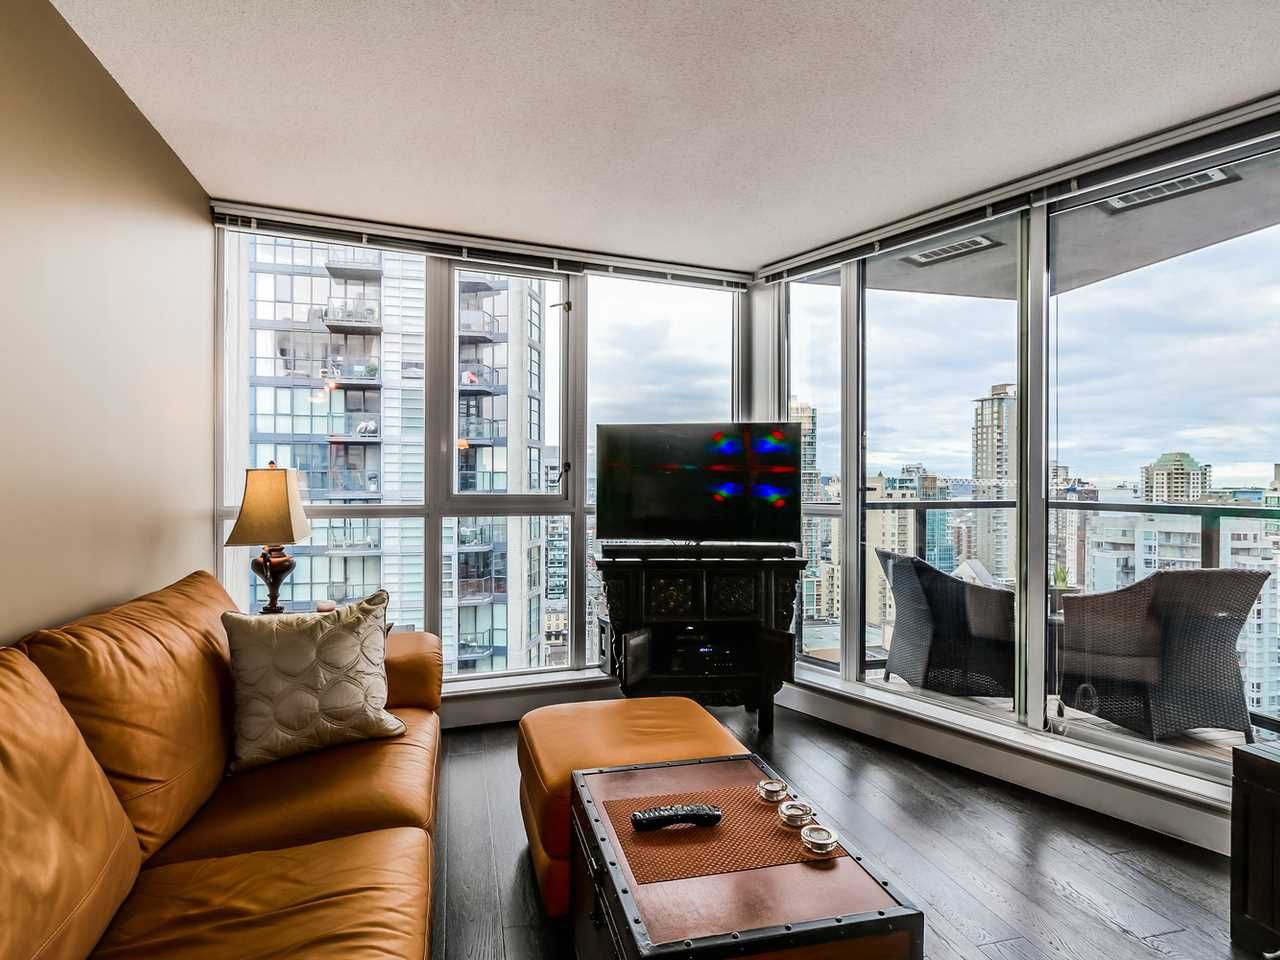 Main Photo: 2308 1155 SEYMOUR STREET in Vancouver: Downtown VW Condo for sale (Vancouver West)  : MLS®# R2026499